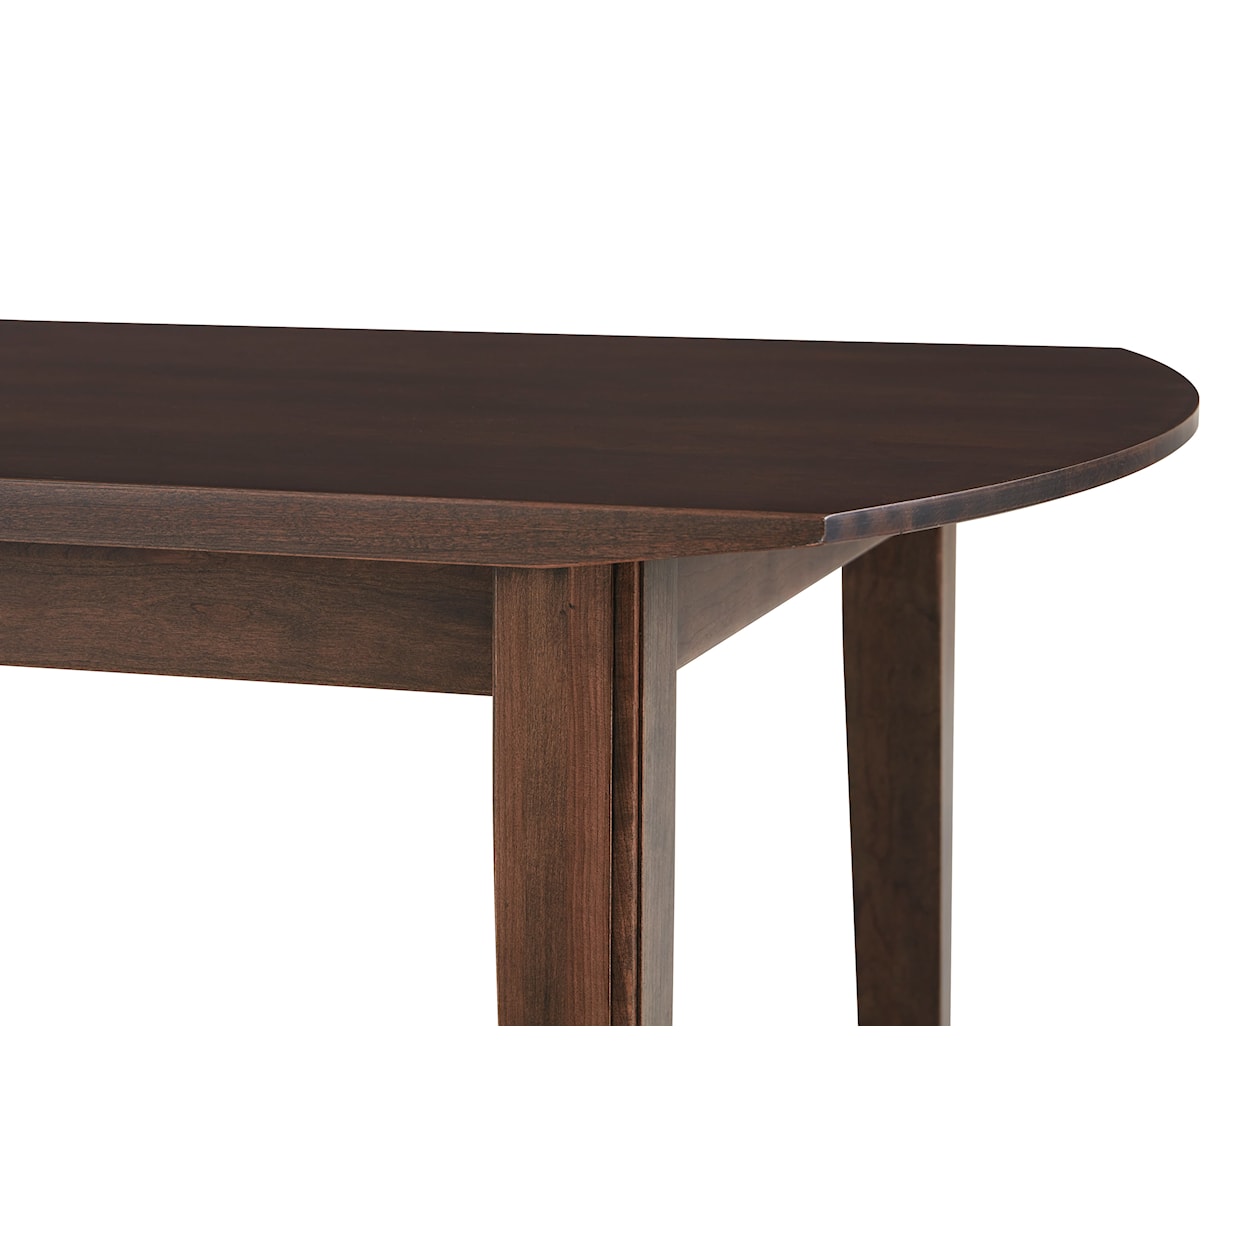 Artisan & Post Crafted Cherry Rectangular Surfboard Table